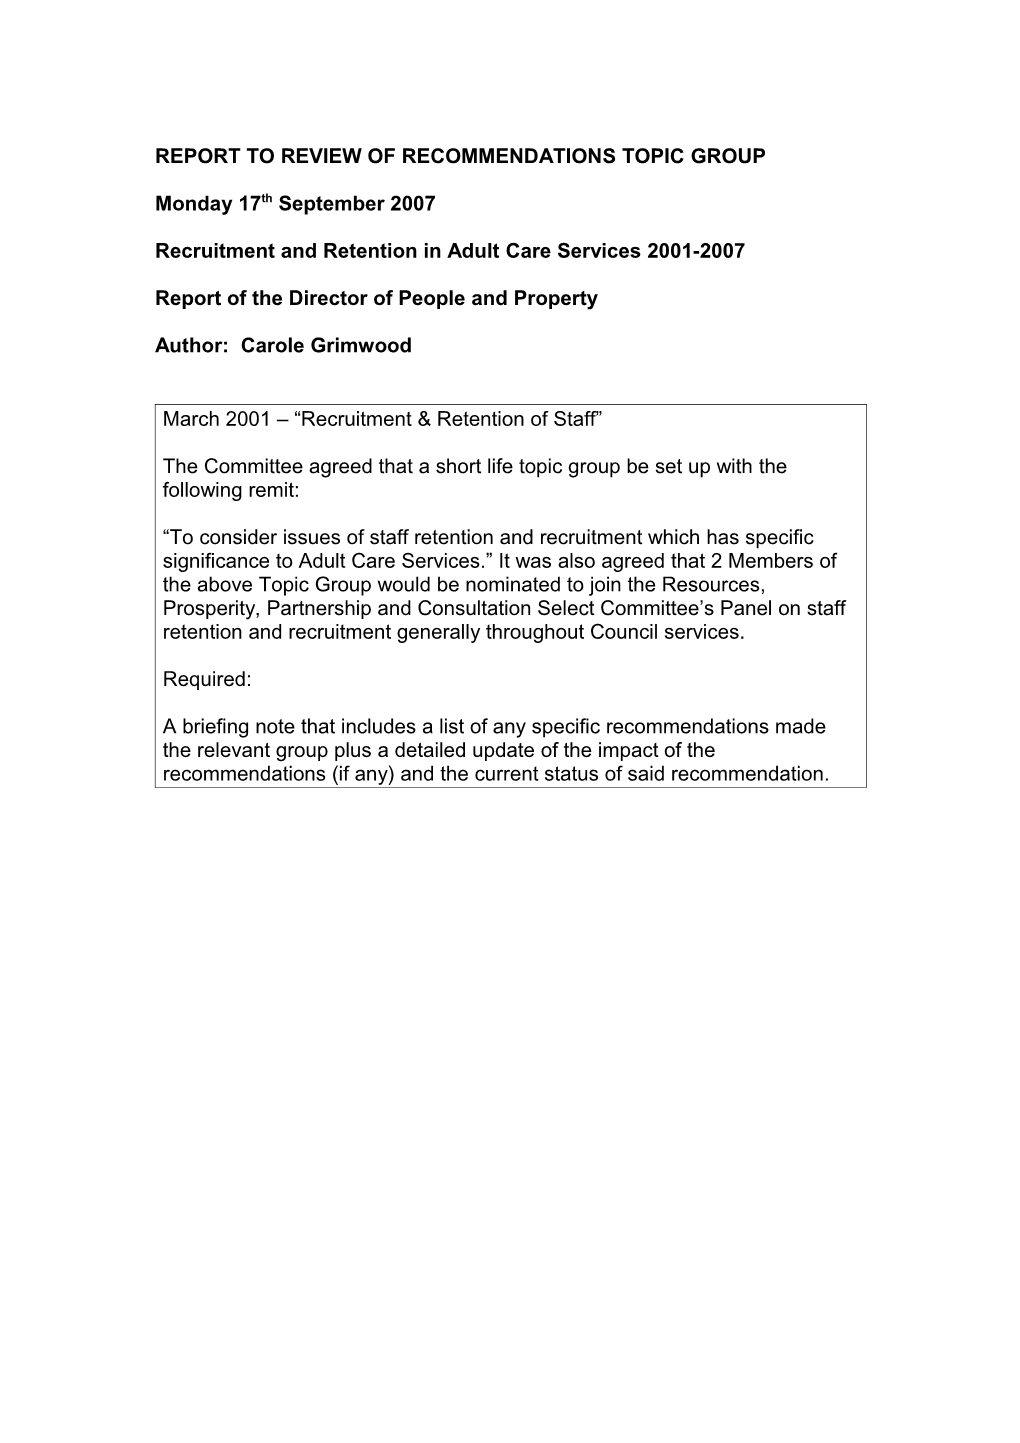 Report to Review of Recommendations Topic Group